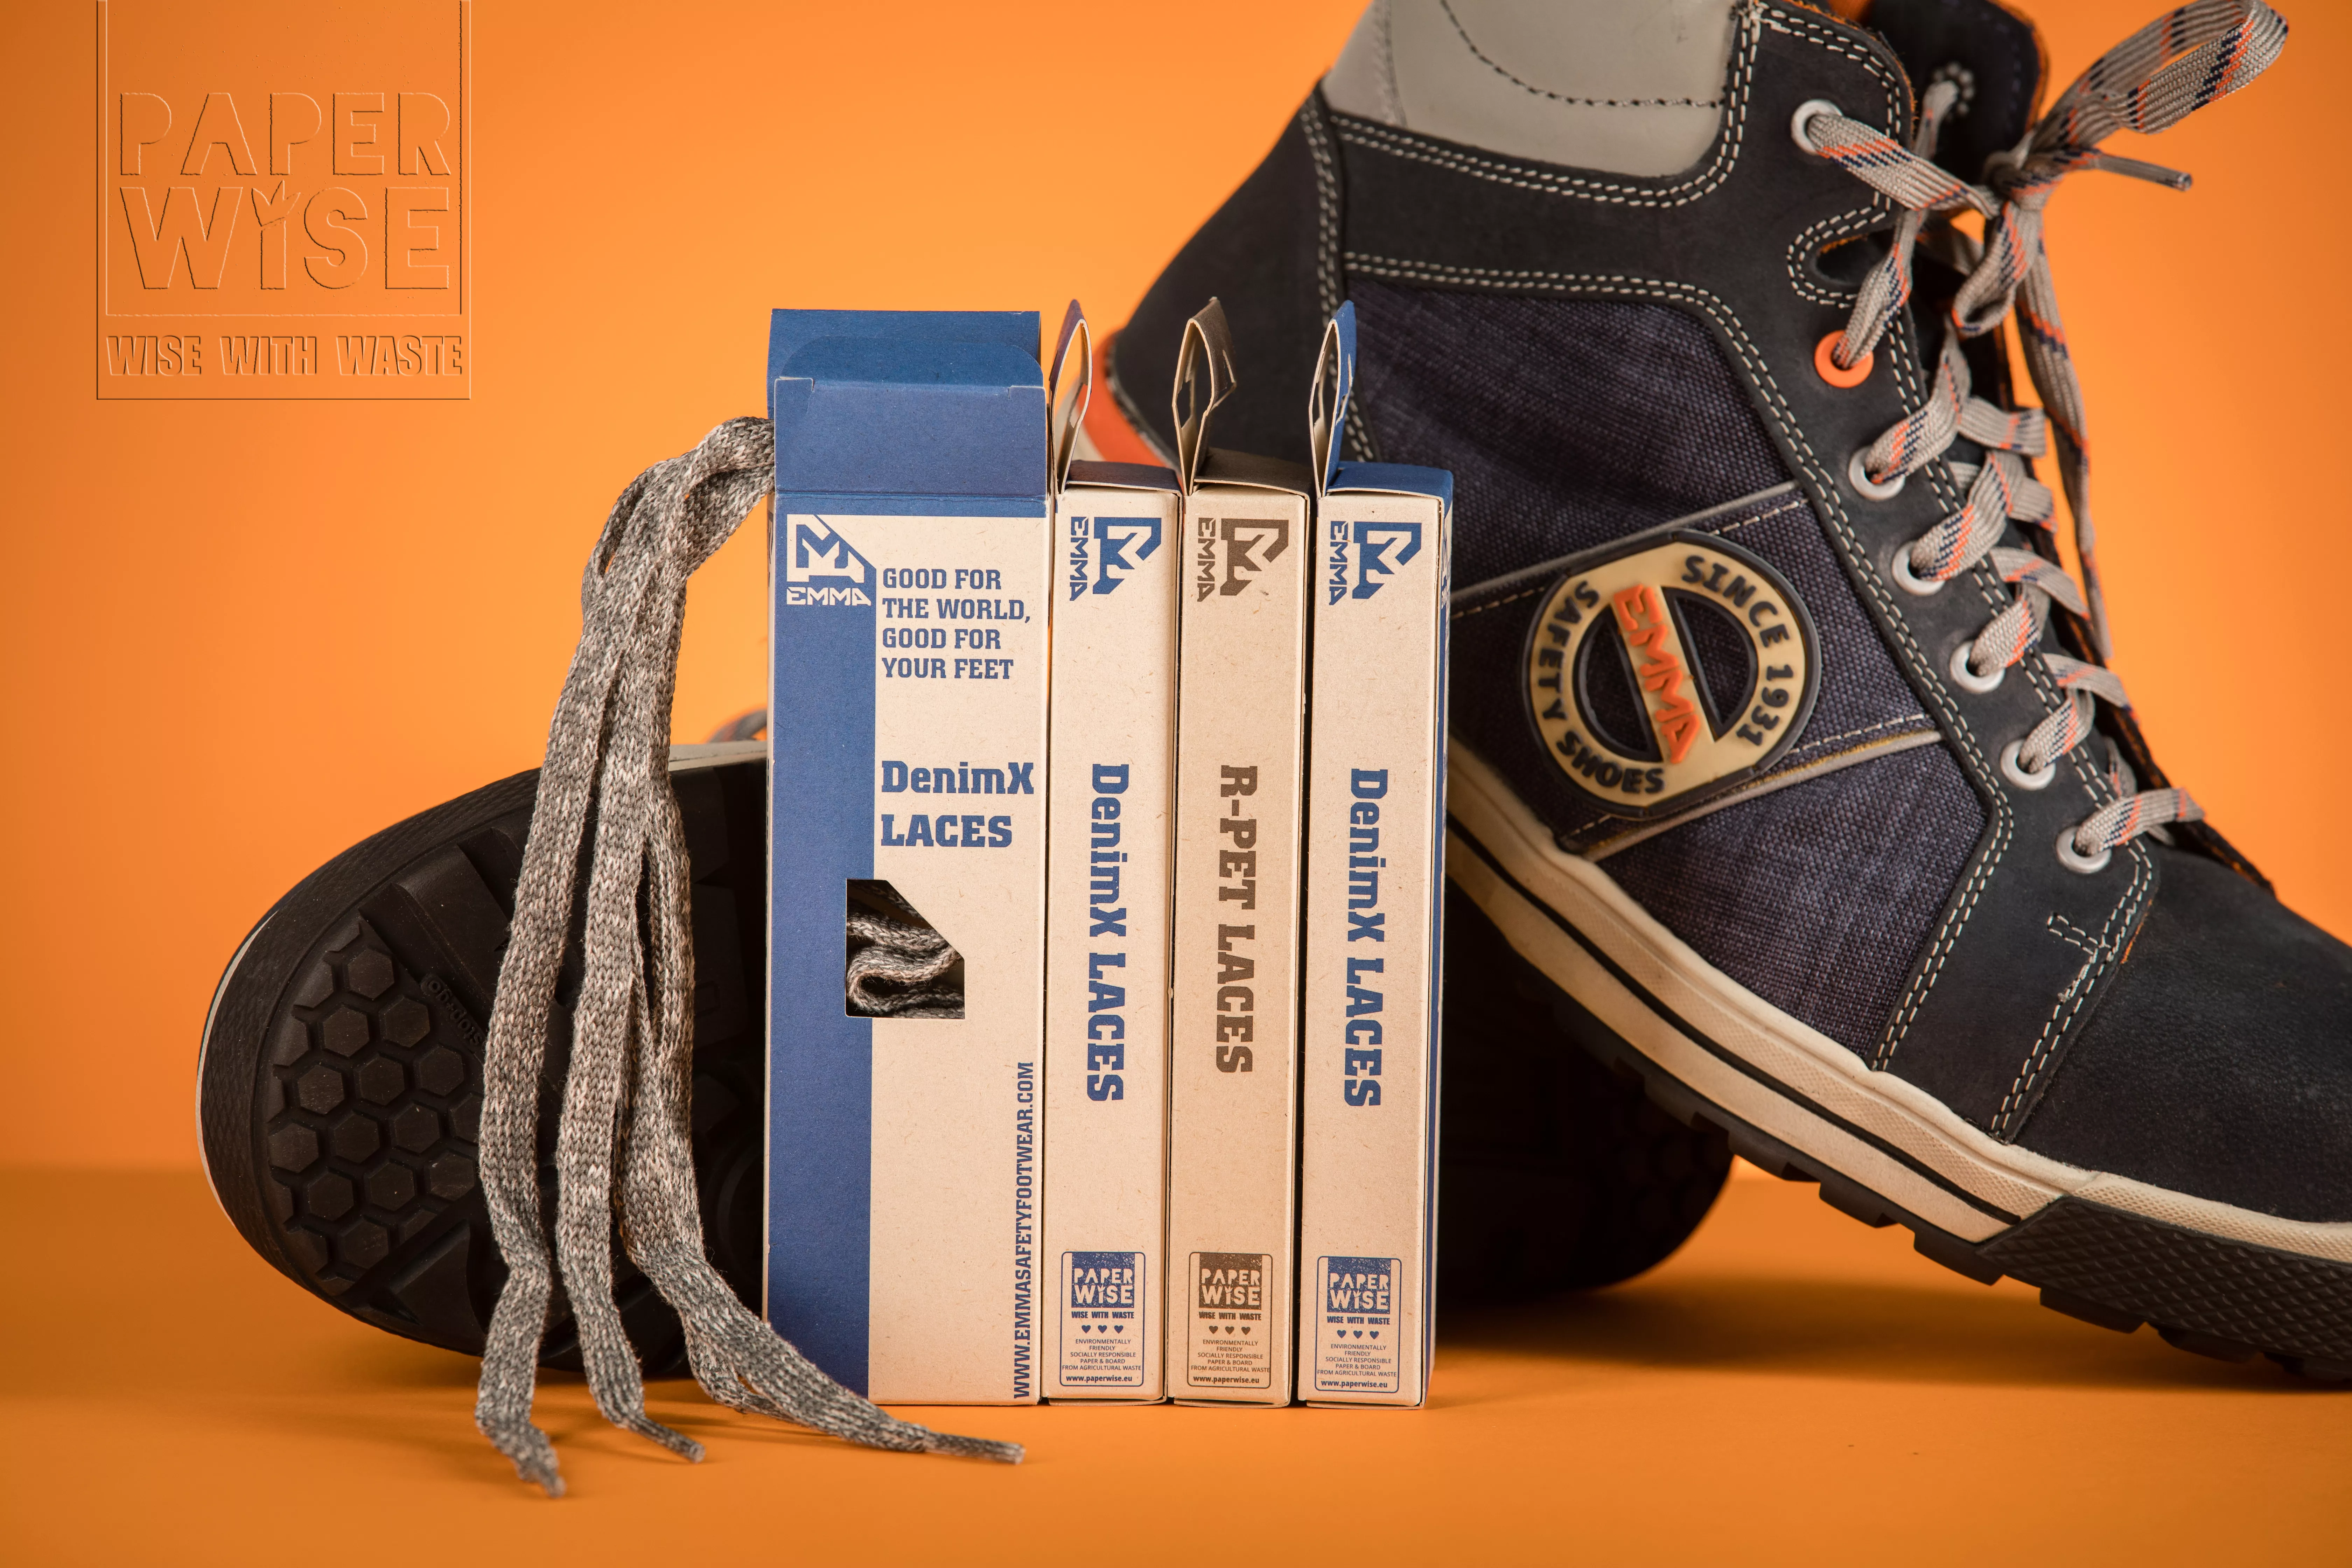 PaperWise eco paper board waste sustainable packaging laces safetyshoes Emma Emmashoes